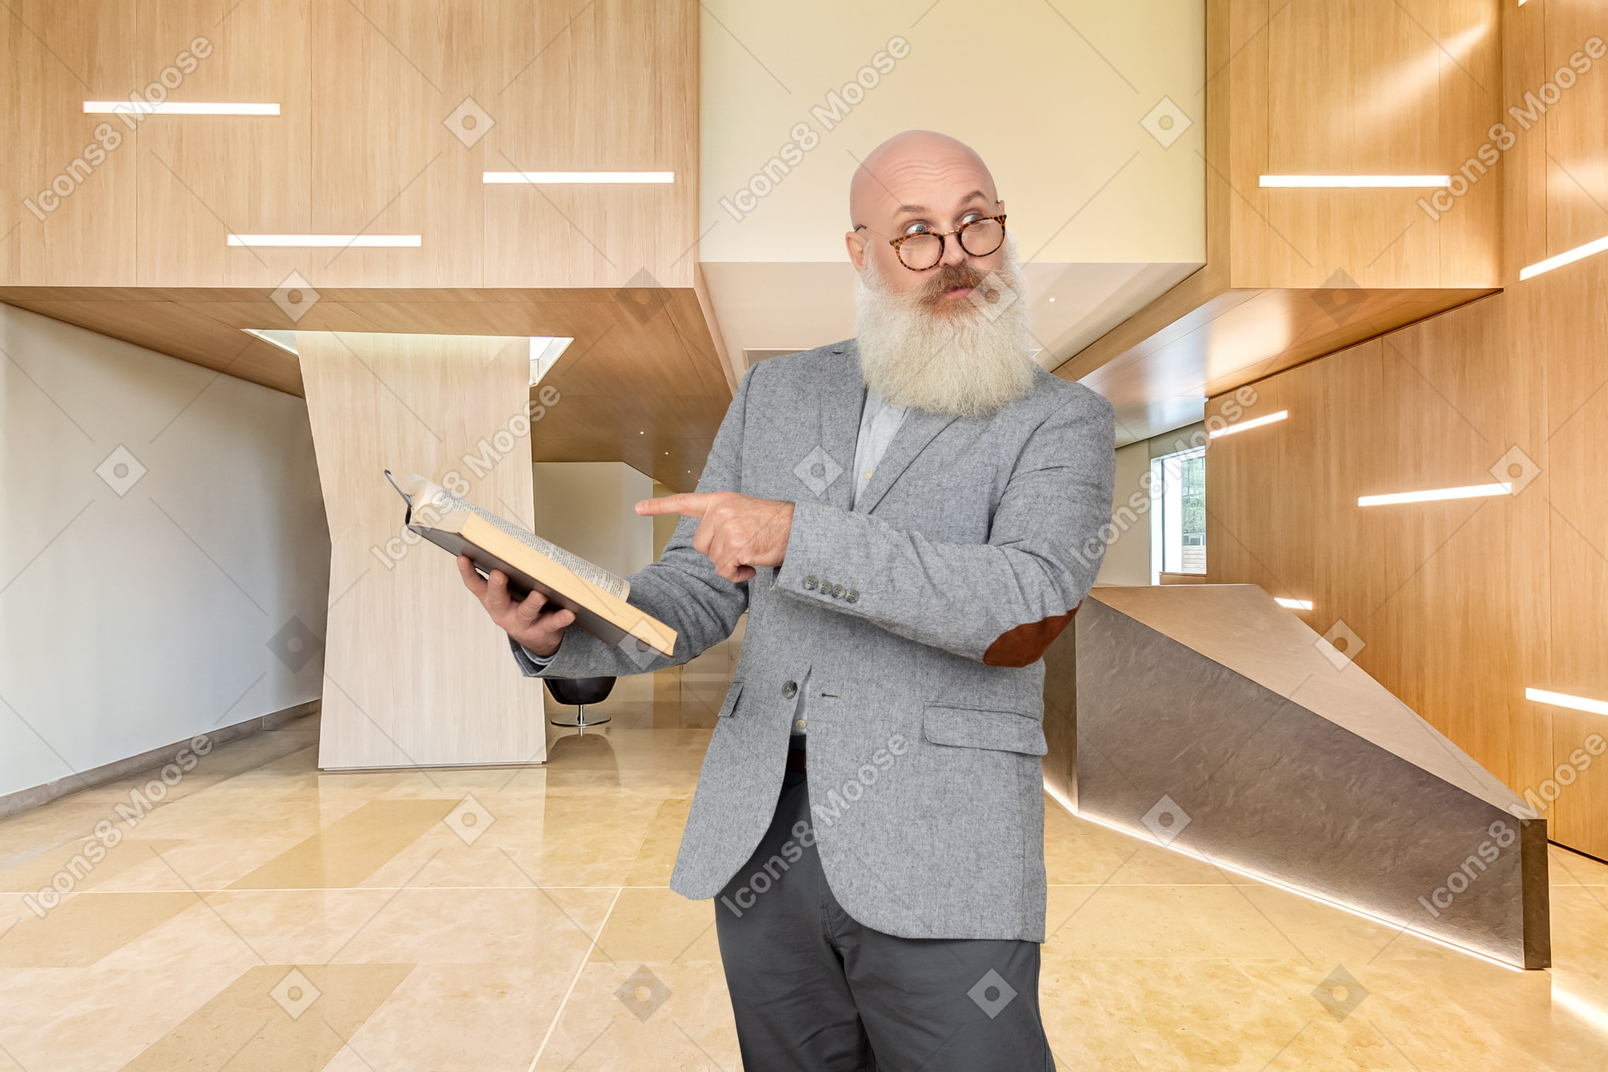 A man with a beard and glasses holding a book